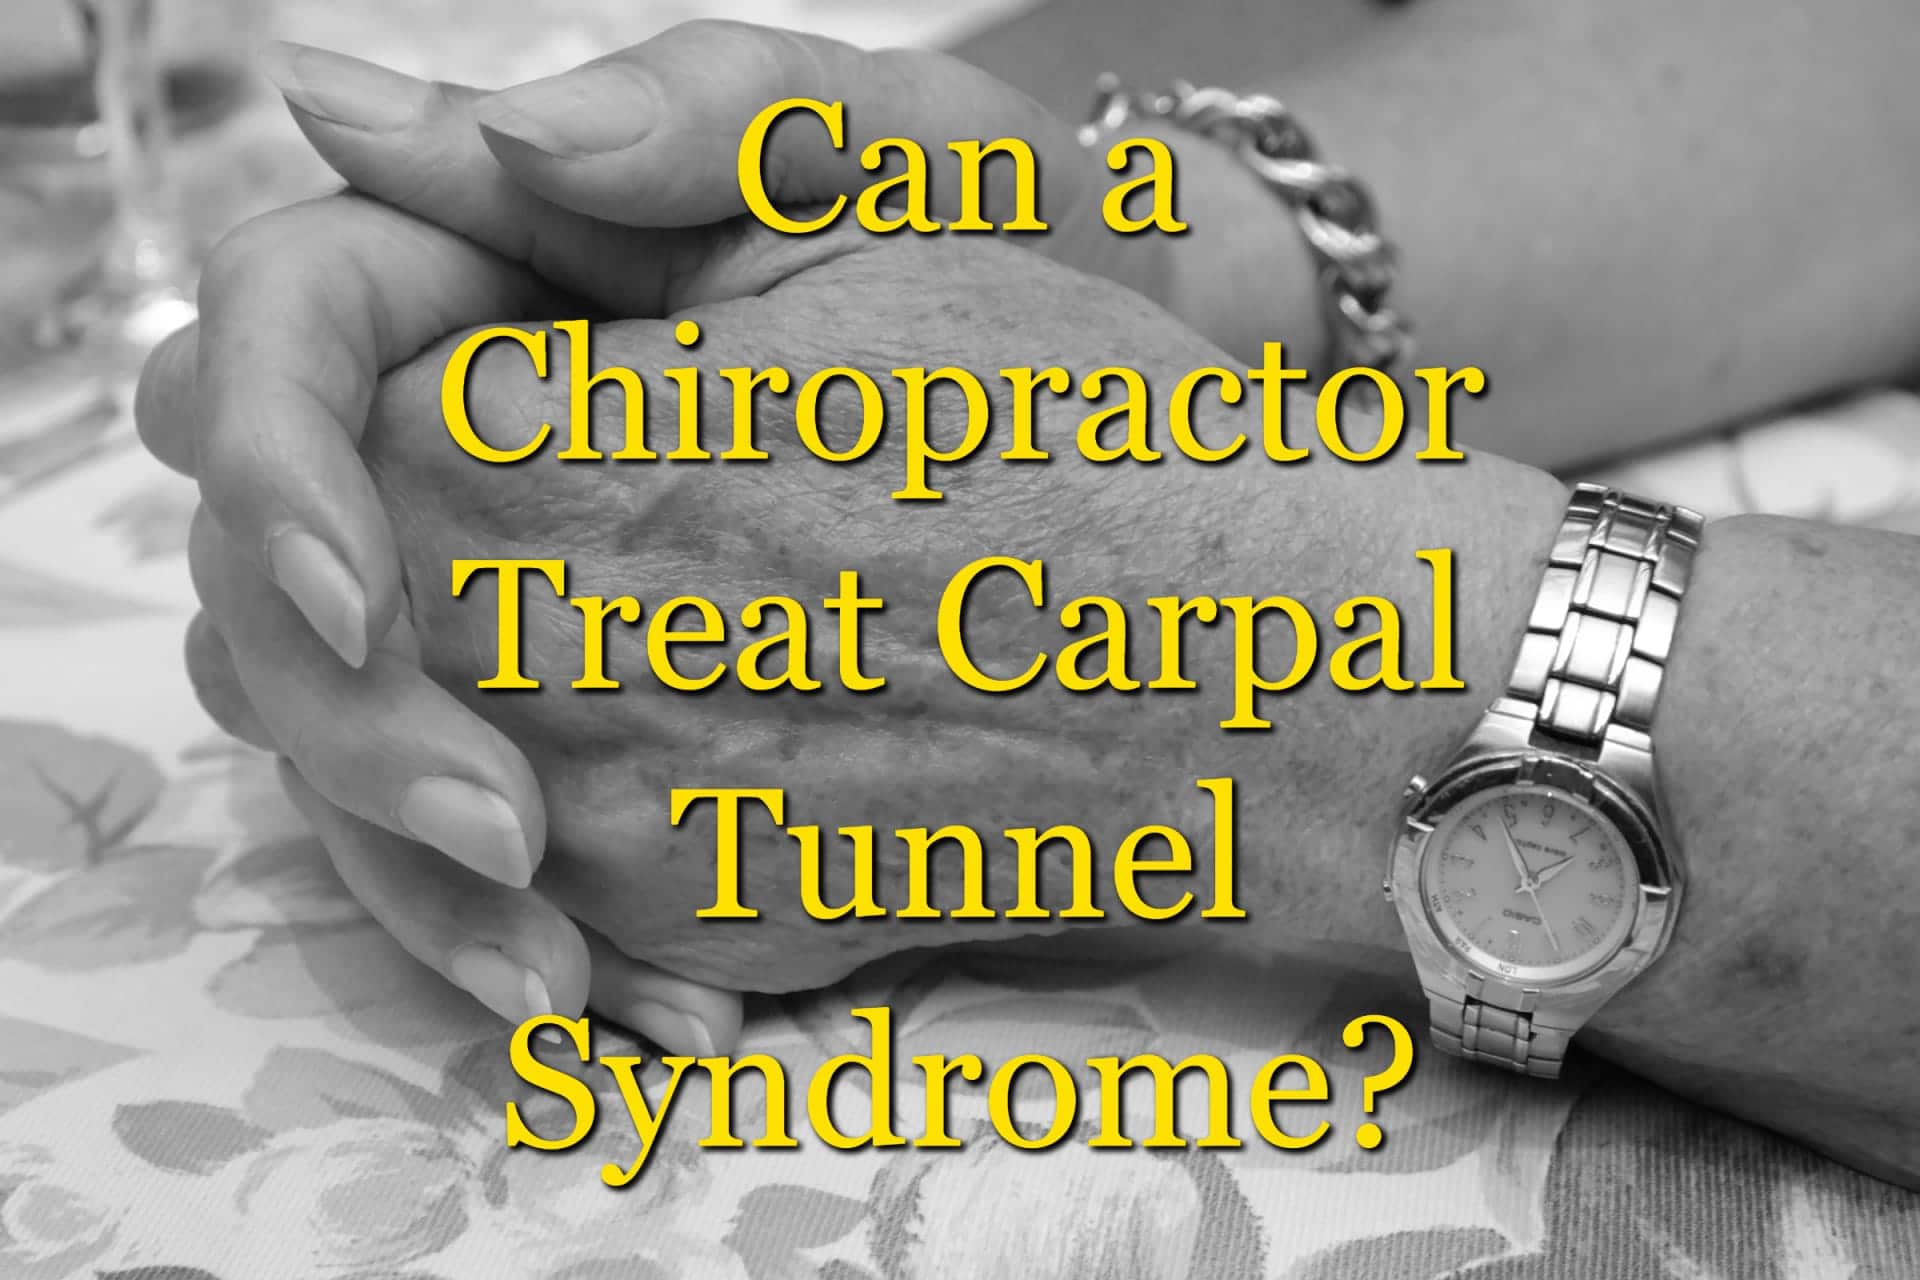 Can a chiropractor treat carpal tunnel syndrome?